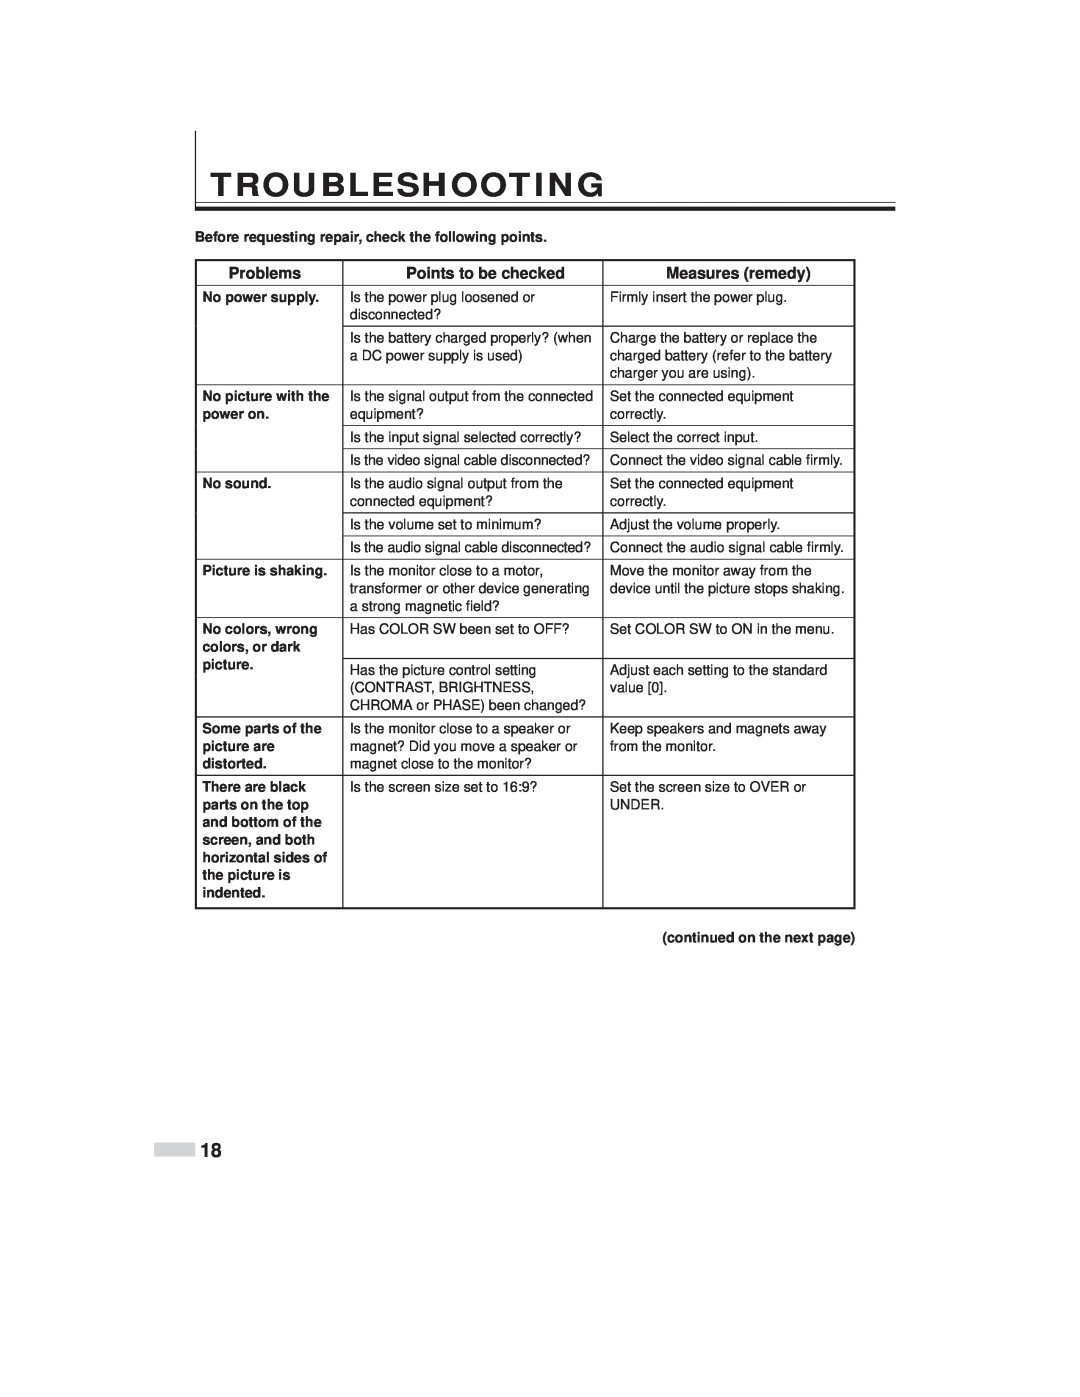 JVC TM-L450TU specifications Troubleshooting, Problems, Points to be checked, Measures remedy 